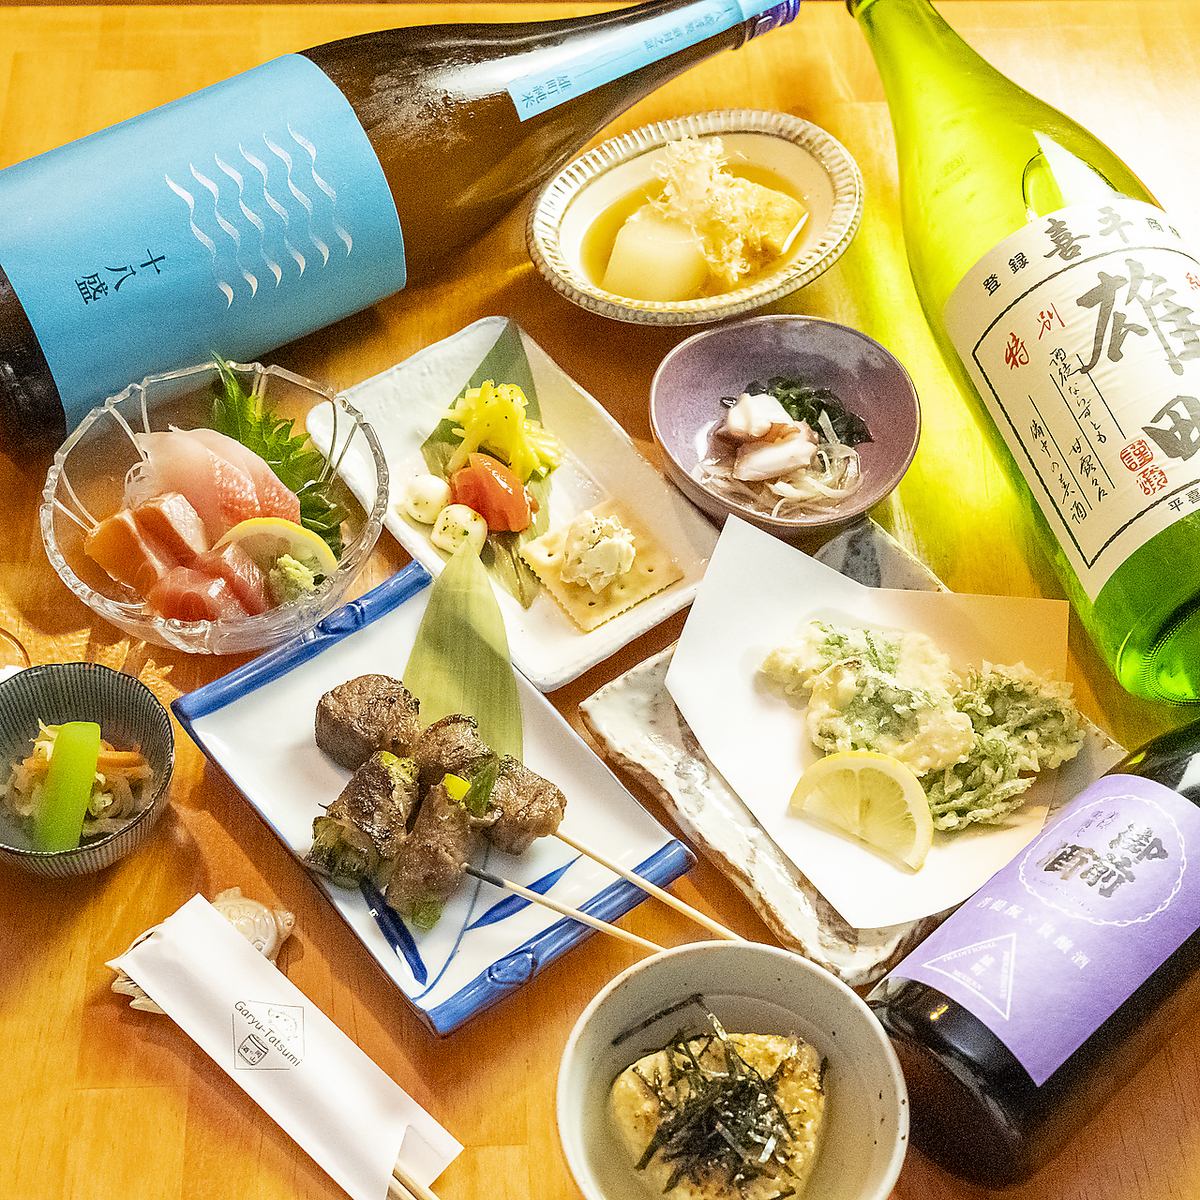 You can enjoy dishes carefully made in Okayama Prefecture and local sake from sake breweries in the prefecture.